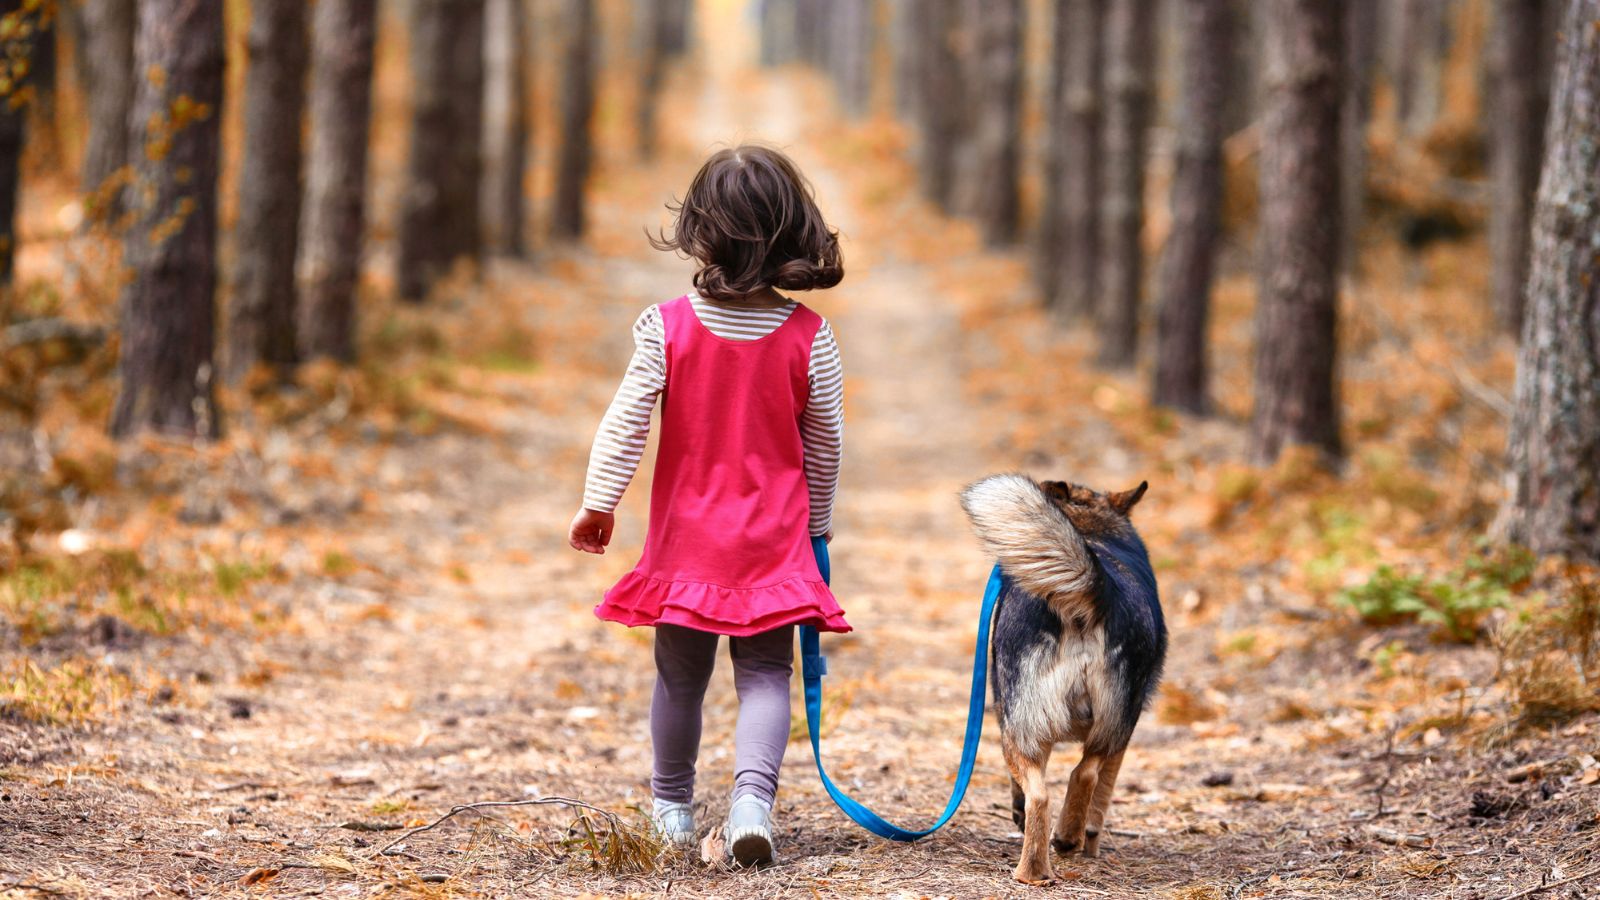 <p><a href="https://www.petmd.com/dog/care/can-dogs-teach-kids-responsibility">PetMD</a> asserts that dogs make excellent family pets for teaching children responsibility. Caring for a dog and meeting all its needs takes work, empathy, and planning, while learning to feed, walk, groom, and train a dog teaches children valuable lessons about caregiving and the value of responsible pet ownership.</p>